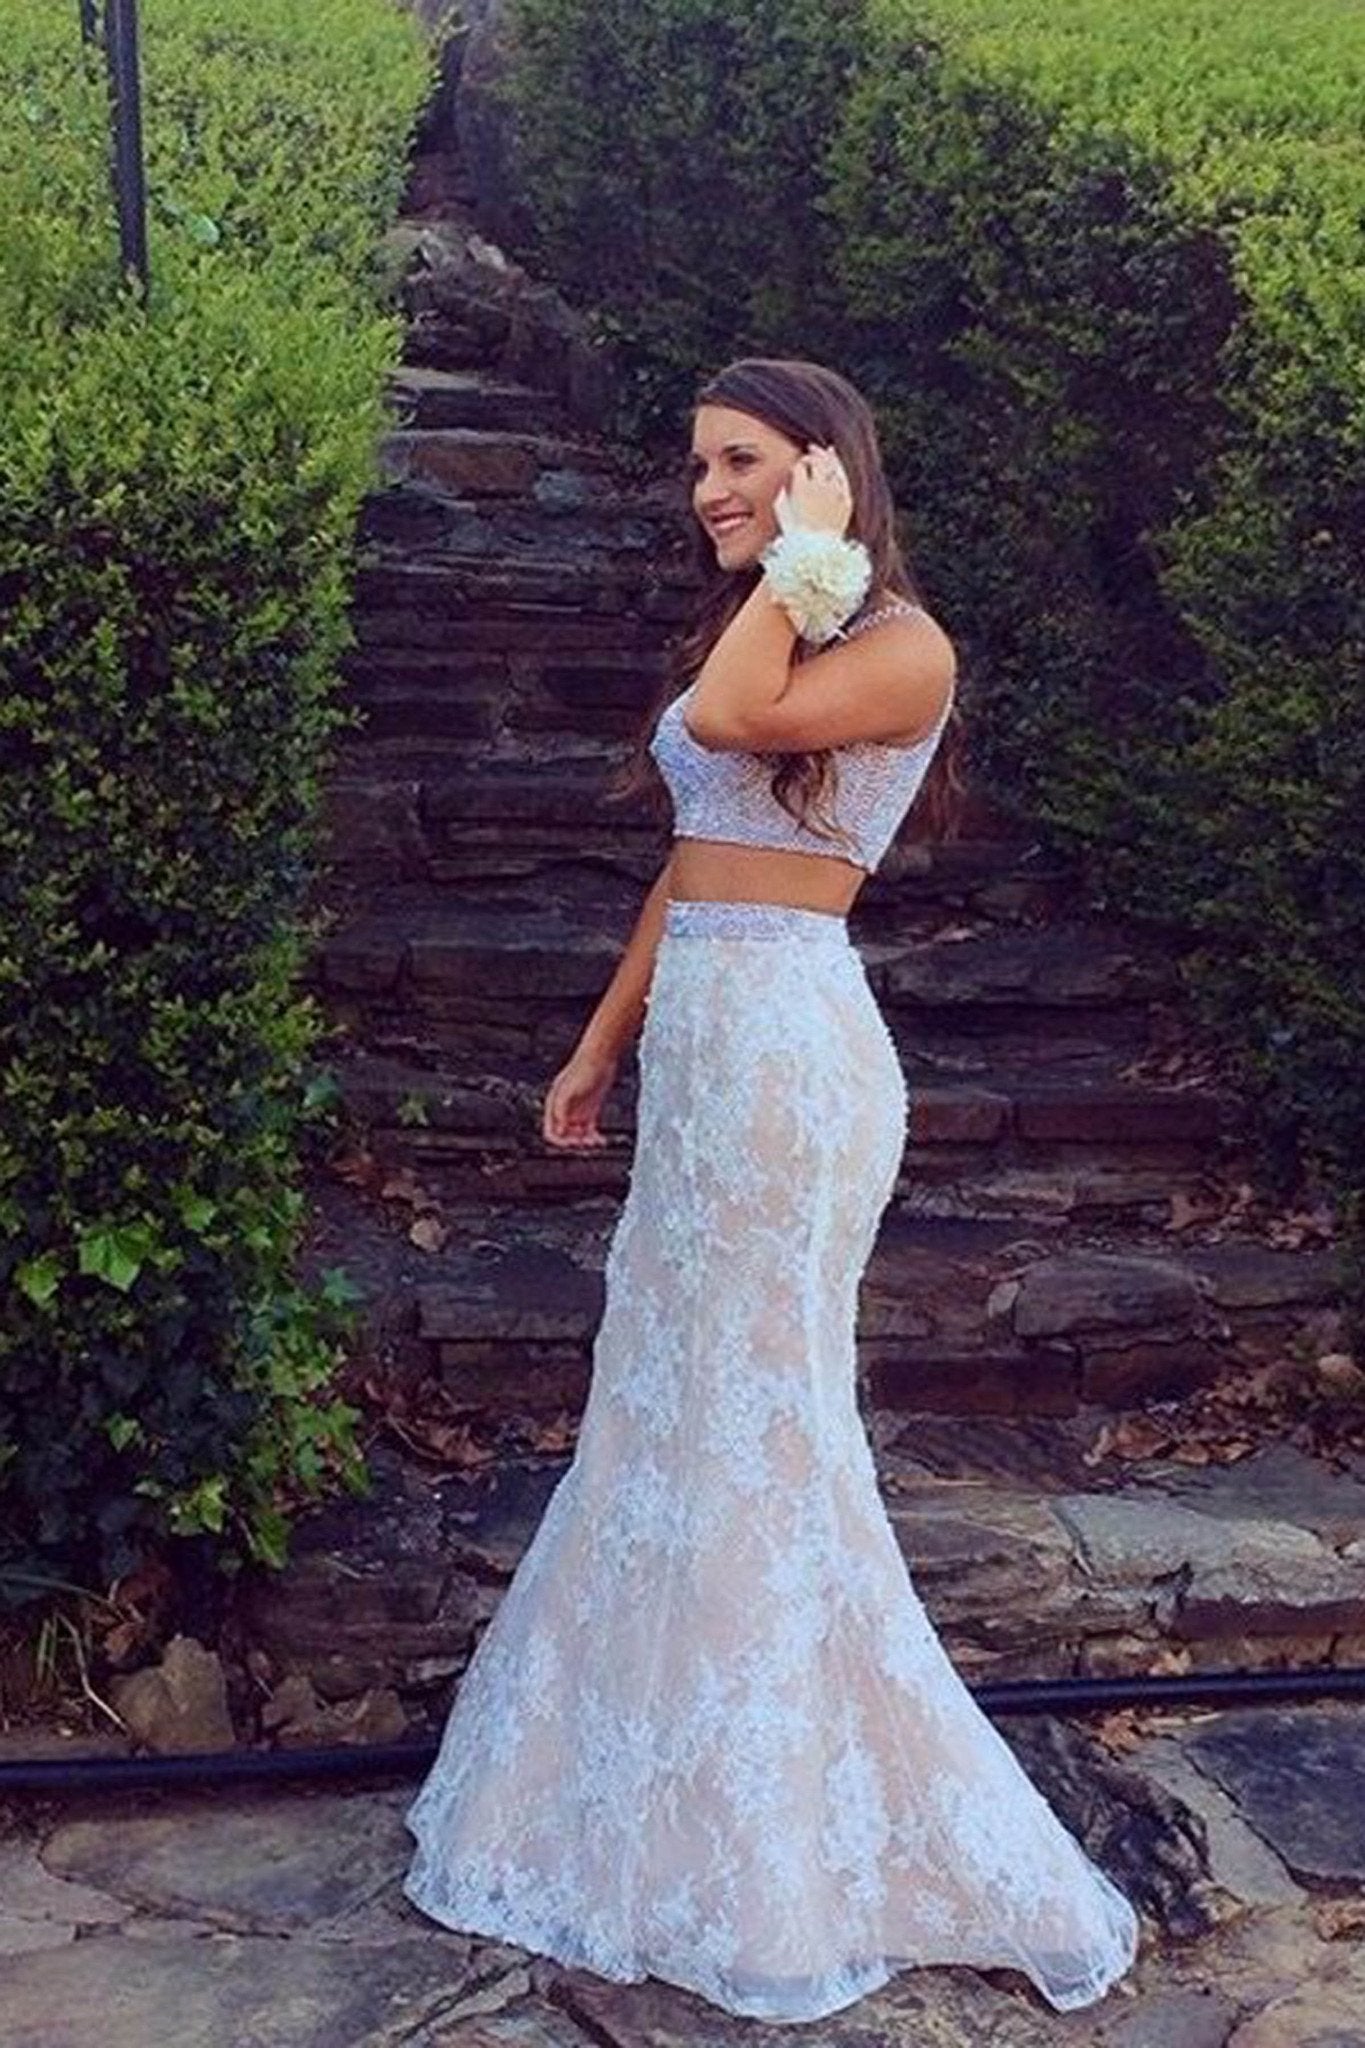 White lace two pieces mermaid beading long prom dress graduation dress